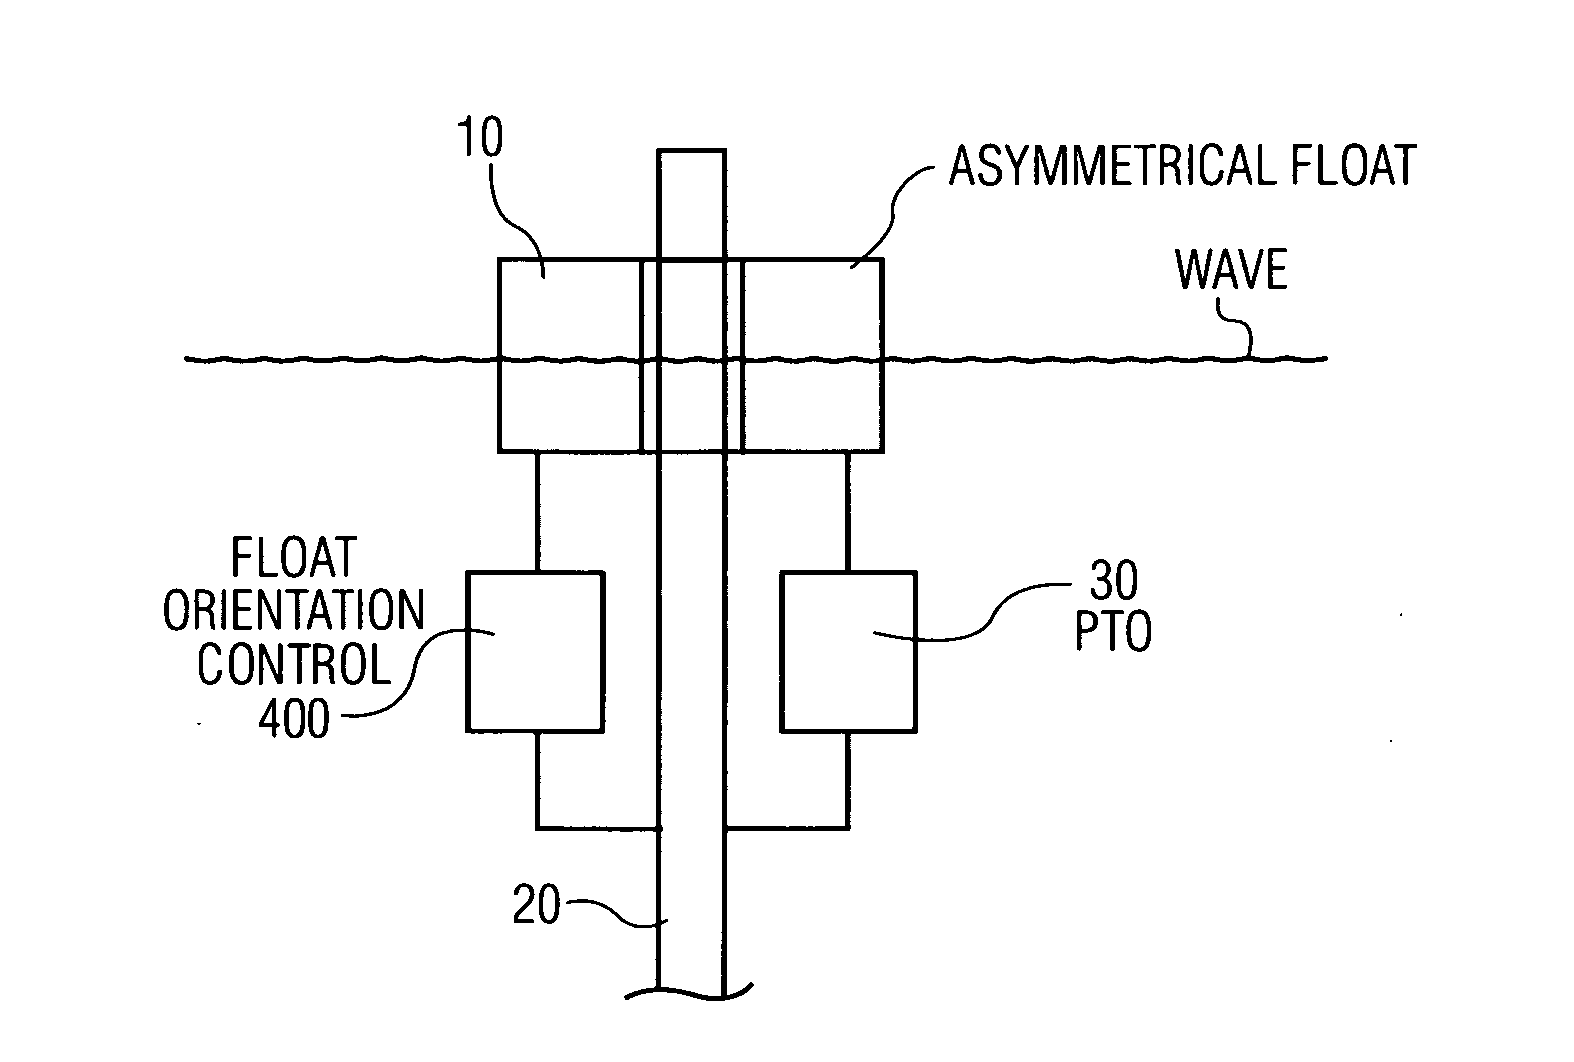 Wave energy converter with asymmetrical float